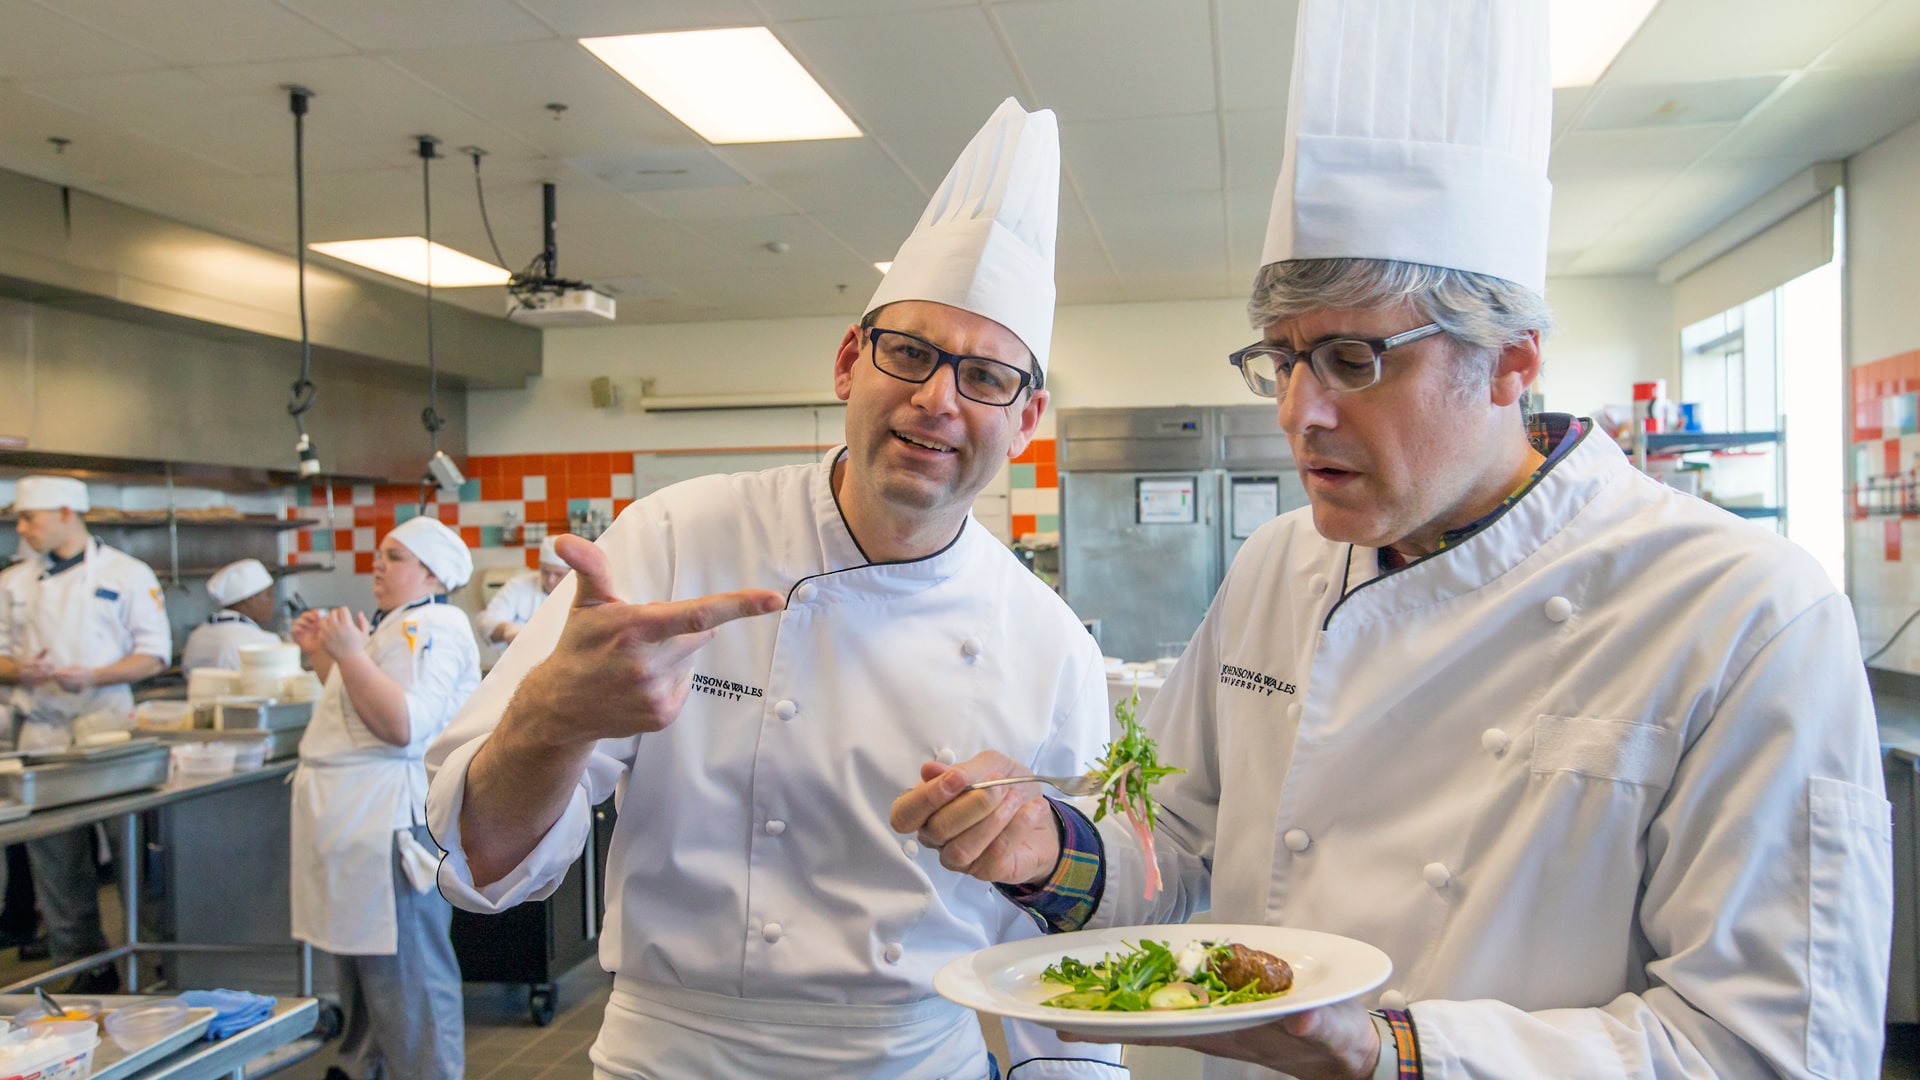 Chef Matthew Britt and Mo Rocca hamming it up for the camera